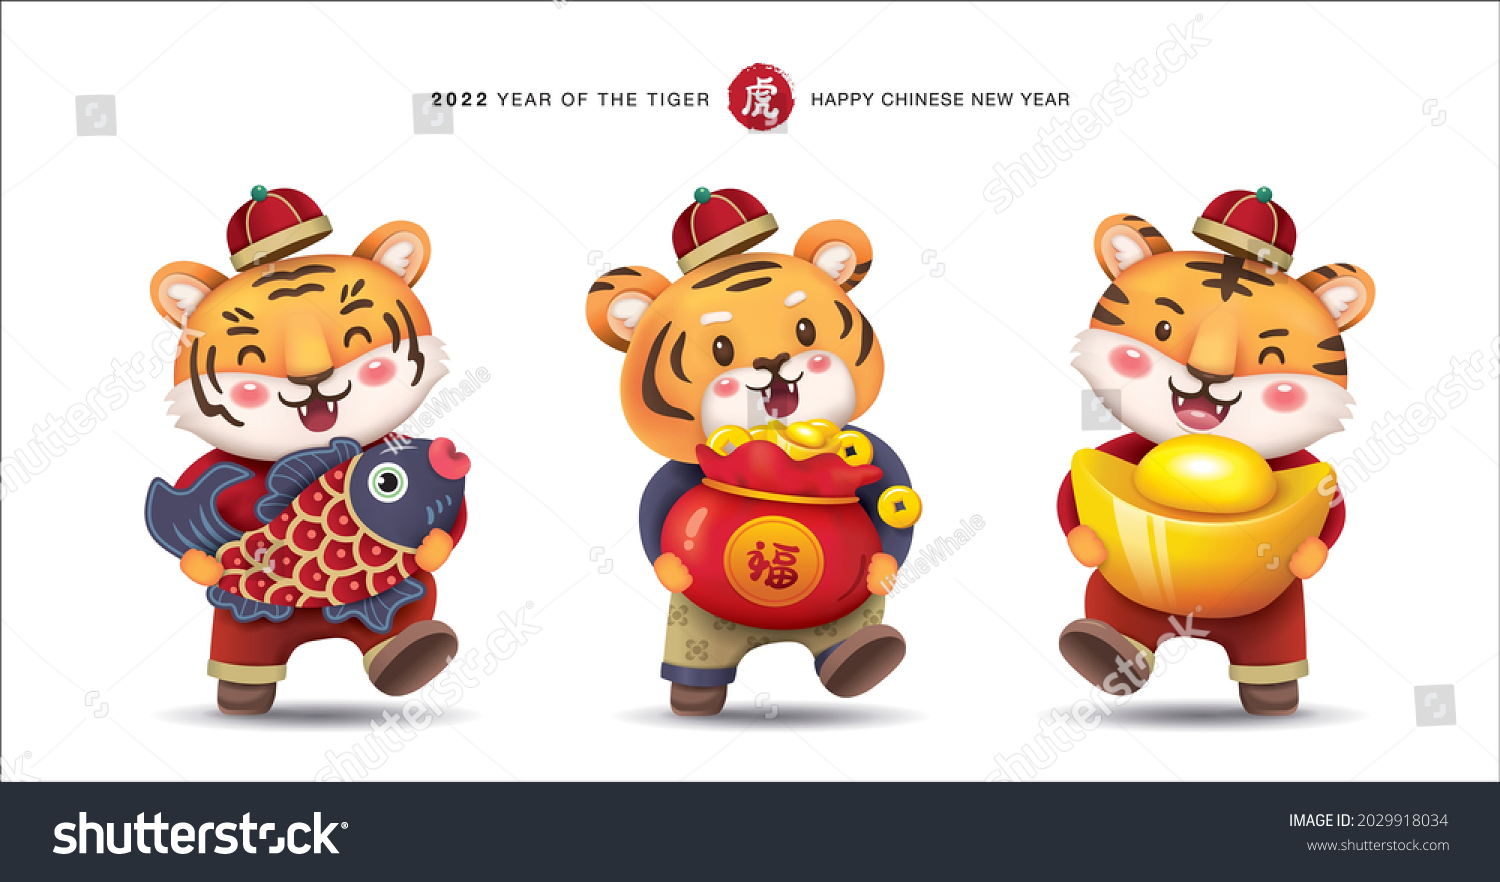 2022 Chinese new year, year of the tiger design with 3 little tigers holding fish, gold ingots and a bag of gold. Chinese translation: tiger (red stamp) #2029918034